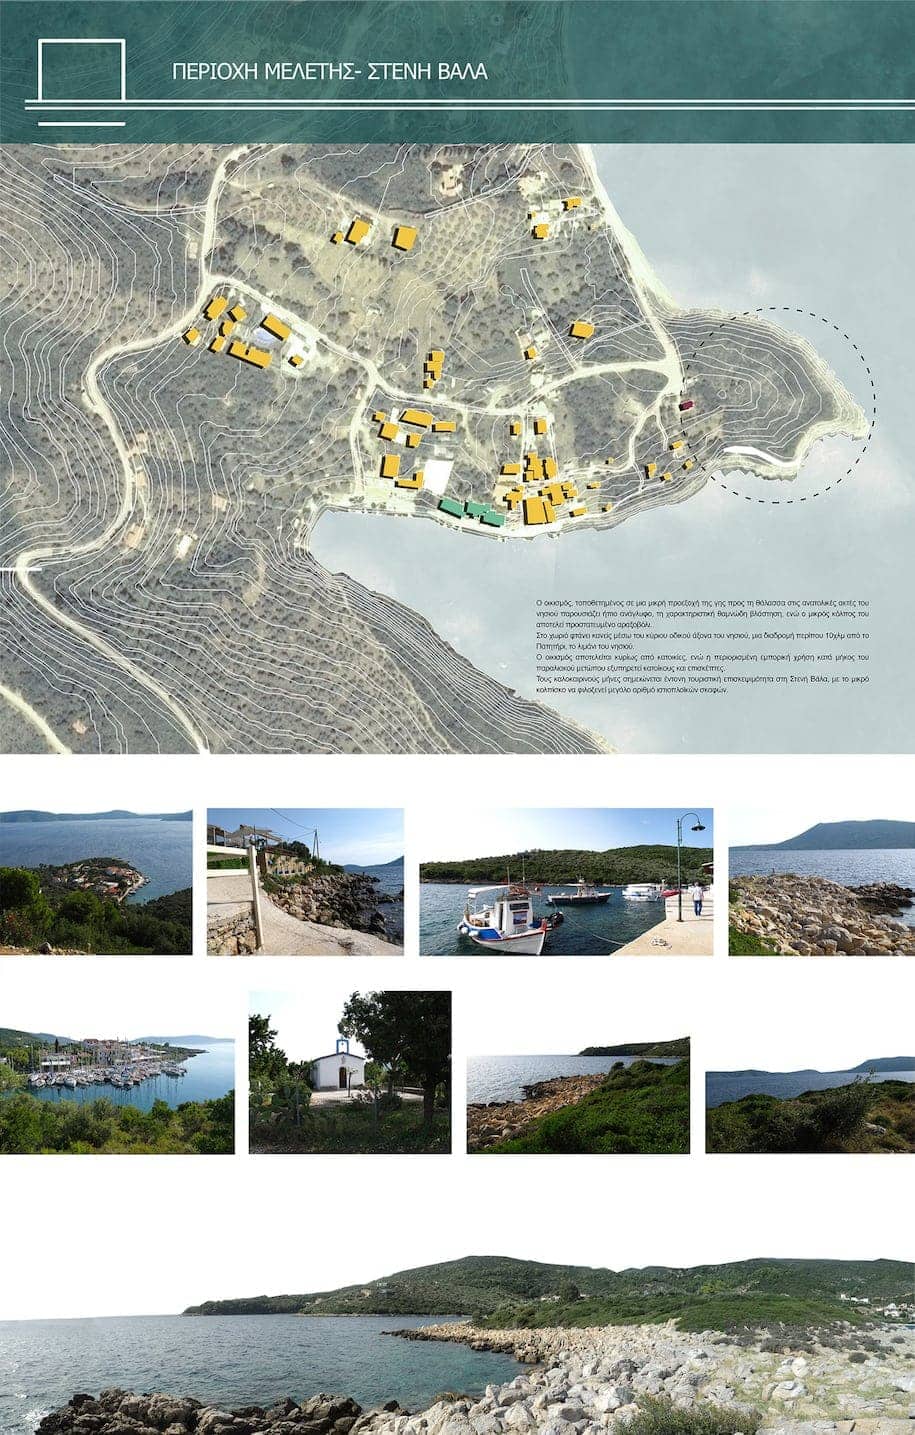 Alonissos, Absence of Exhibit, research center, visitors centre, maritime archaeology, Diploma project, Thesis, Thesis project, NTUA, Ariadni Vozani, Student project, Malakozi Paraskevi, Stergiou Styliani